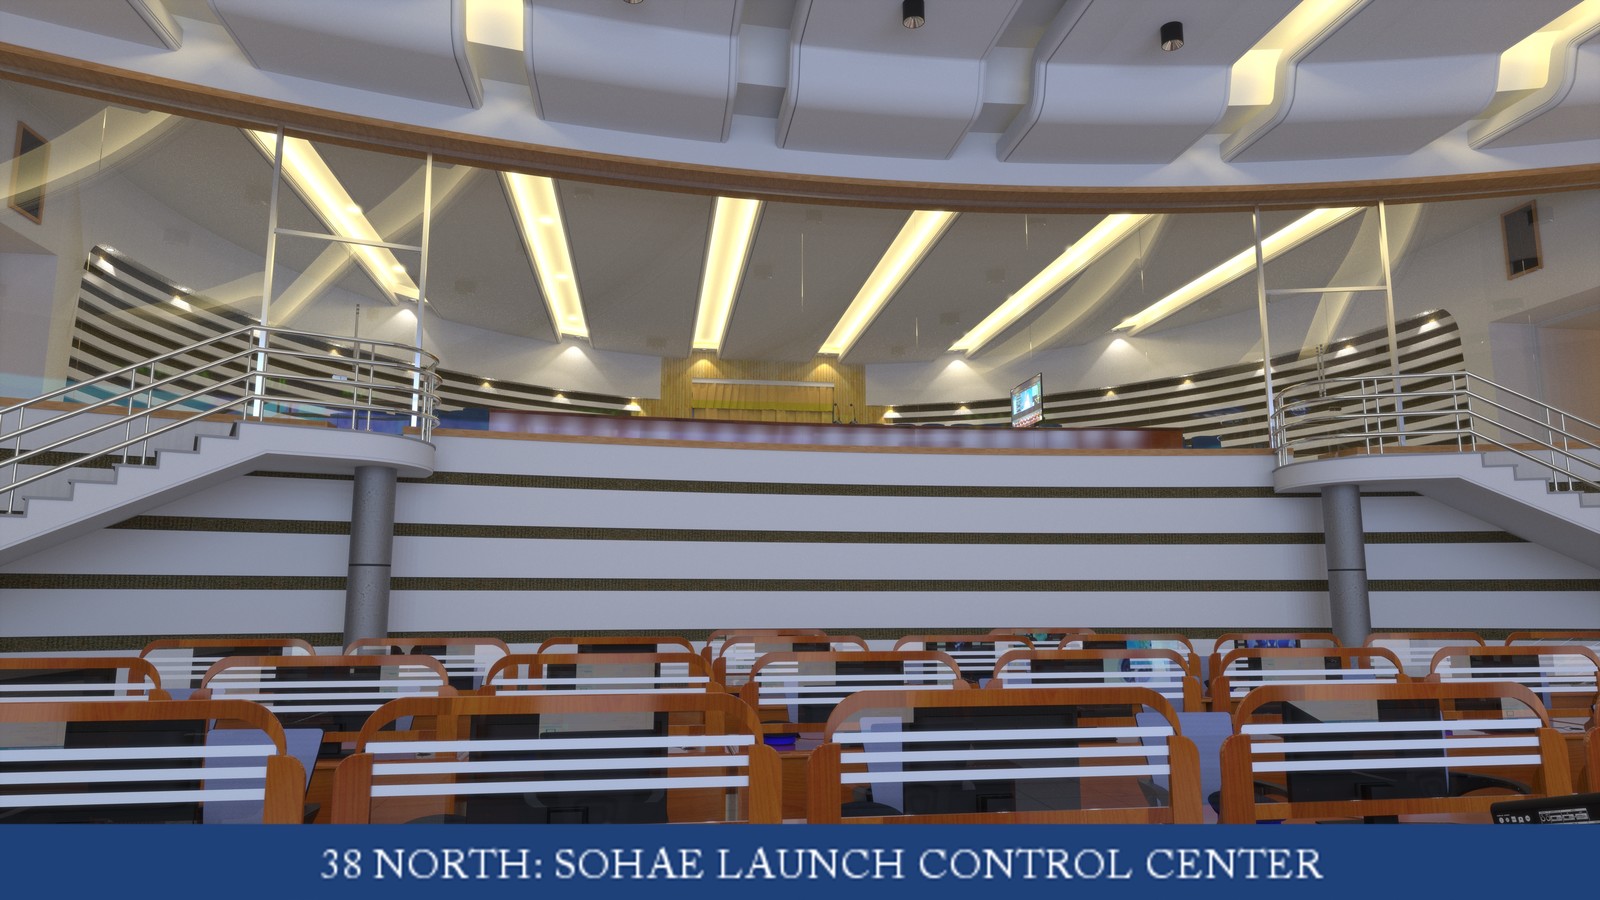 Sohae Satellite Launching Station's Launch for 38 North
Control Room 02
Model by Nathan J Hunt​/Edited &amp; Rendered by Duane Kemp
Project for 38North

Read the story here:
http://www.kemppro.com/KP-3D-Sohae-Launch-Control-Room-WIRED-Magazine.html 